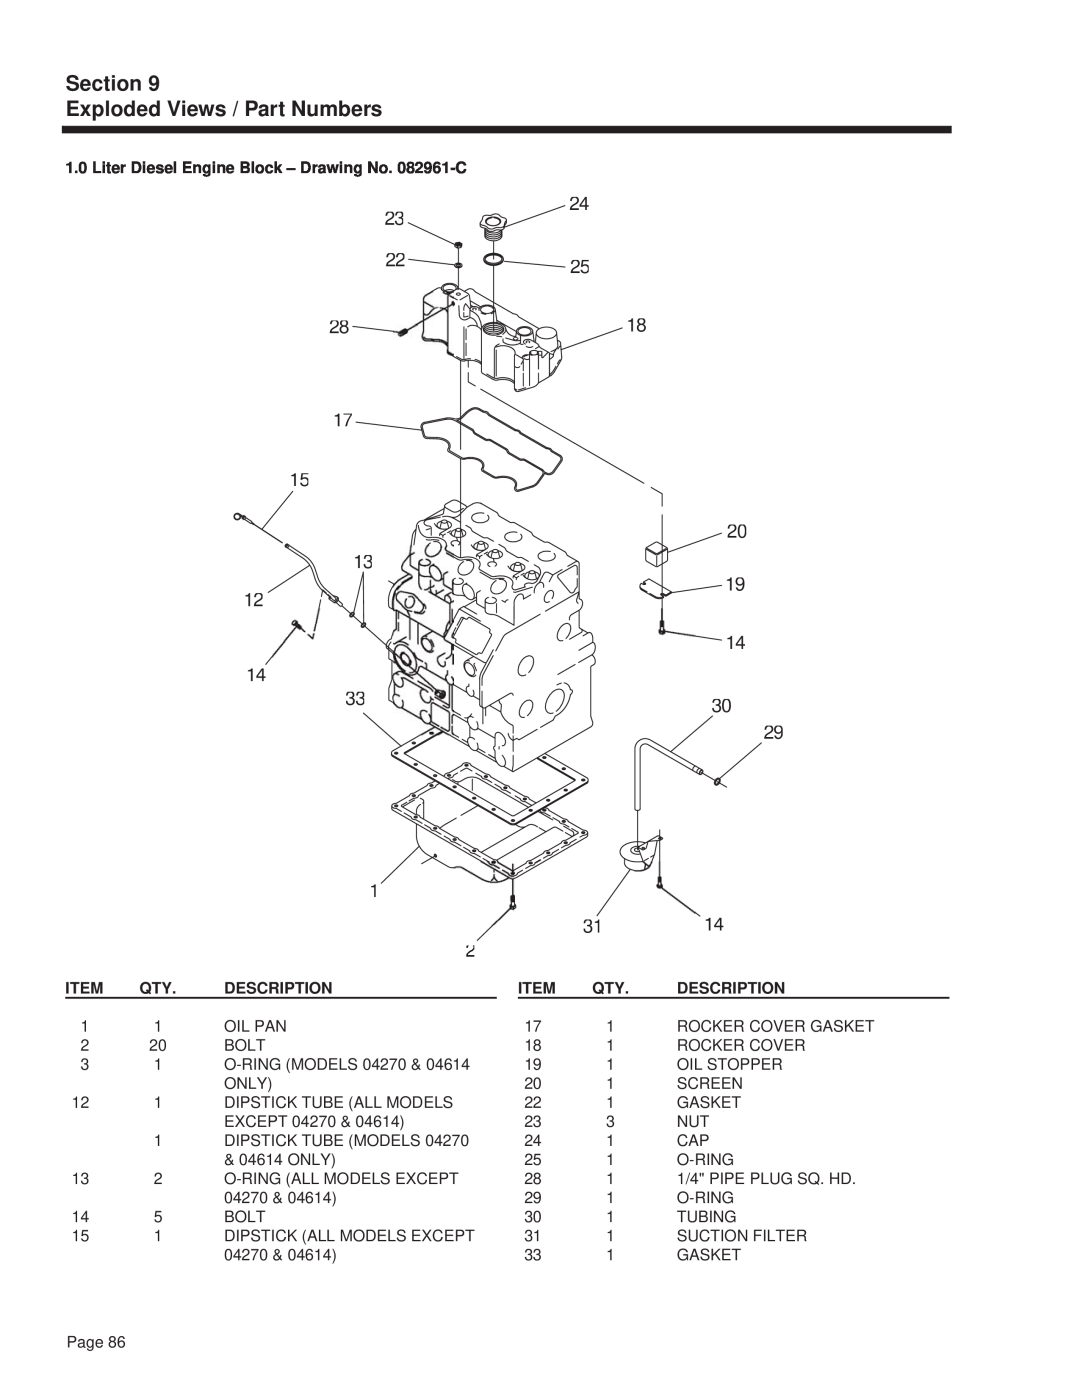 Guardian Technologies 4270 3114, Section Exploded Views / Part Numbers, Liter Diesel Engine Block - Drawing No. 082961-C 